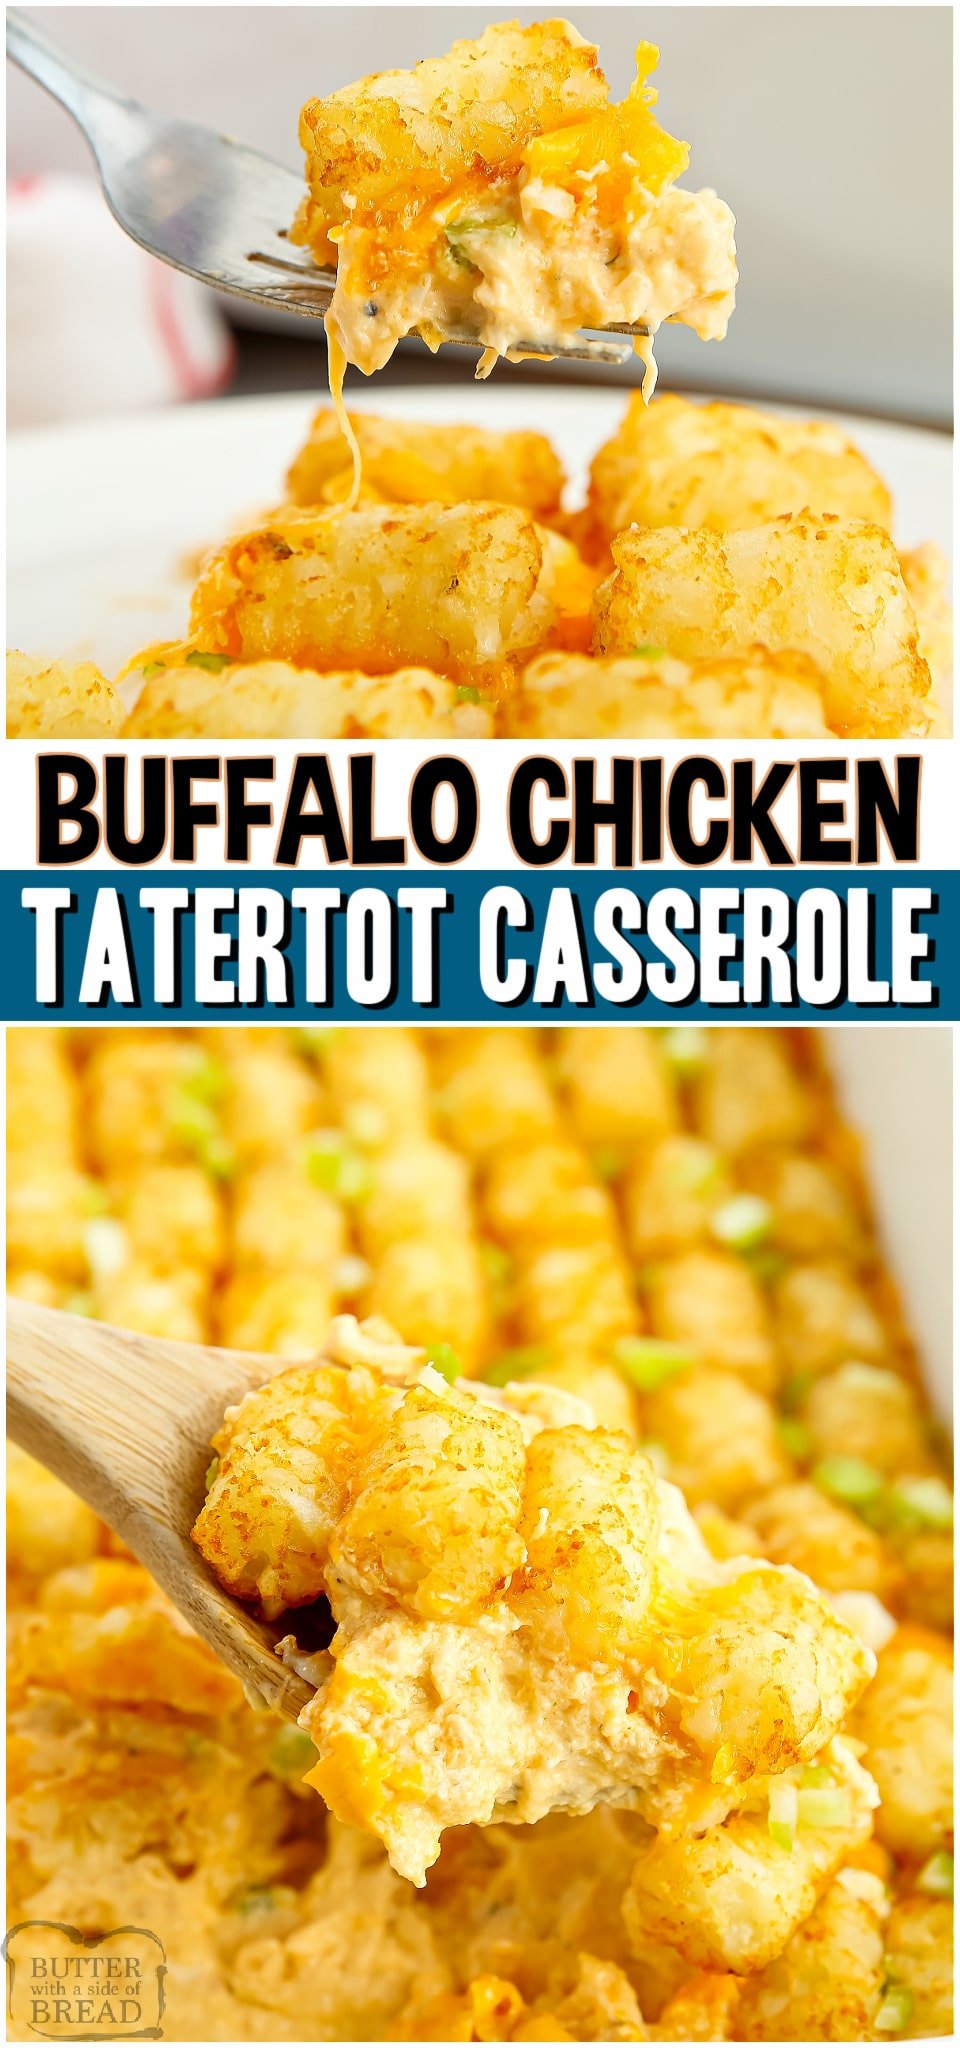 We took our favorite Tater Tot Casserole and added a Buffalo Chicken twist! Made with buffalo wing sauce, chicken, cheese & tater tots, this dinner's packed with creamy, cheesy flavor!